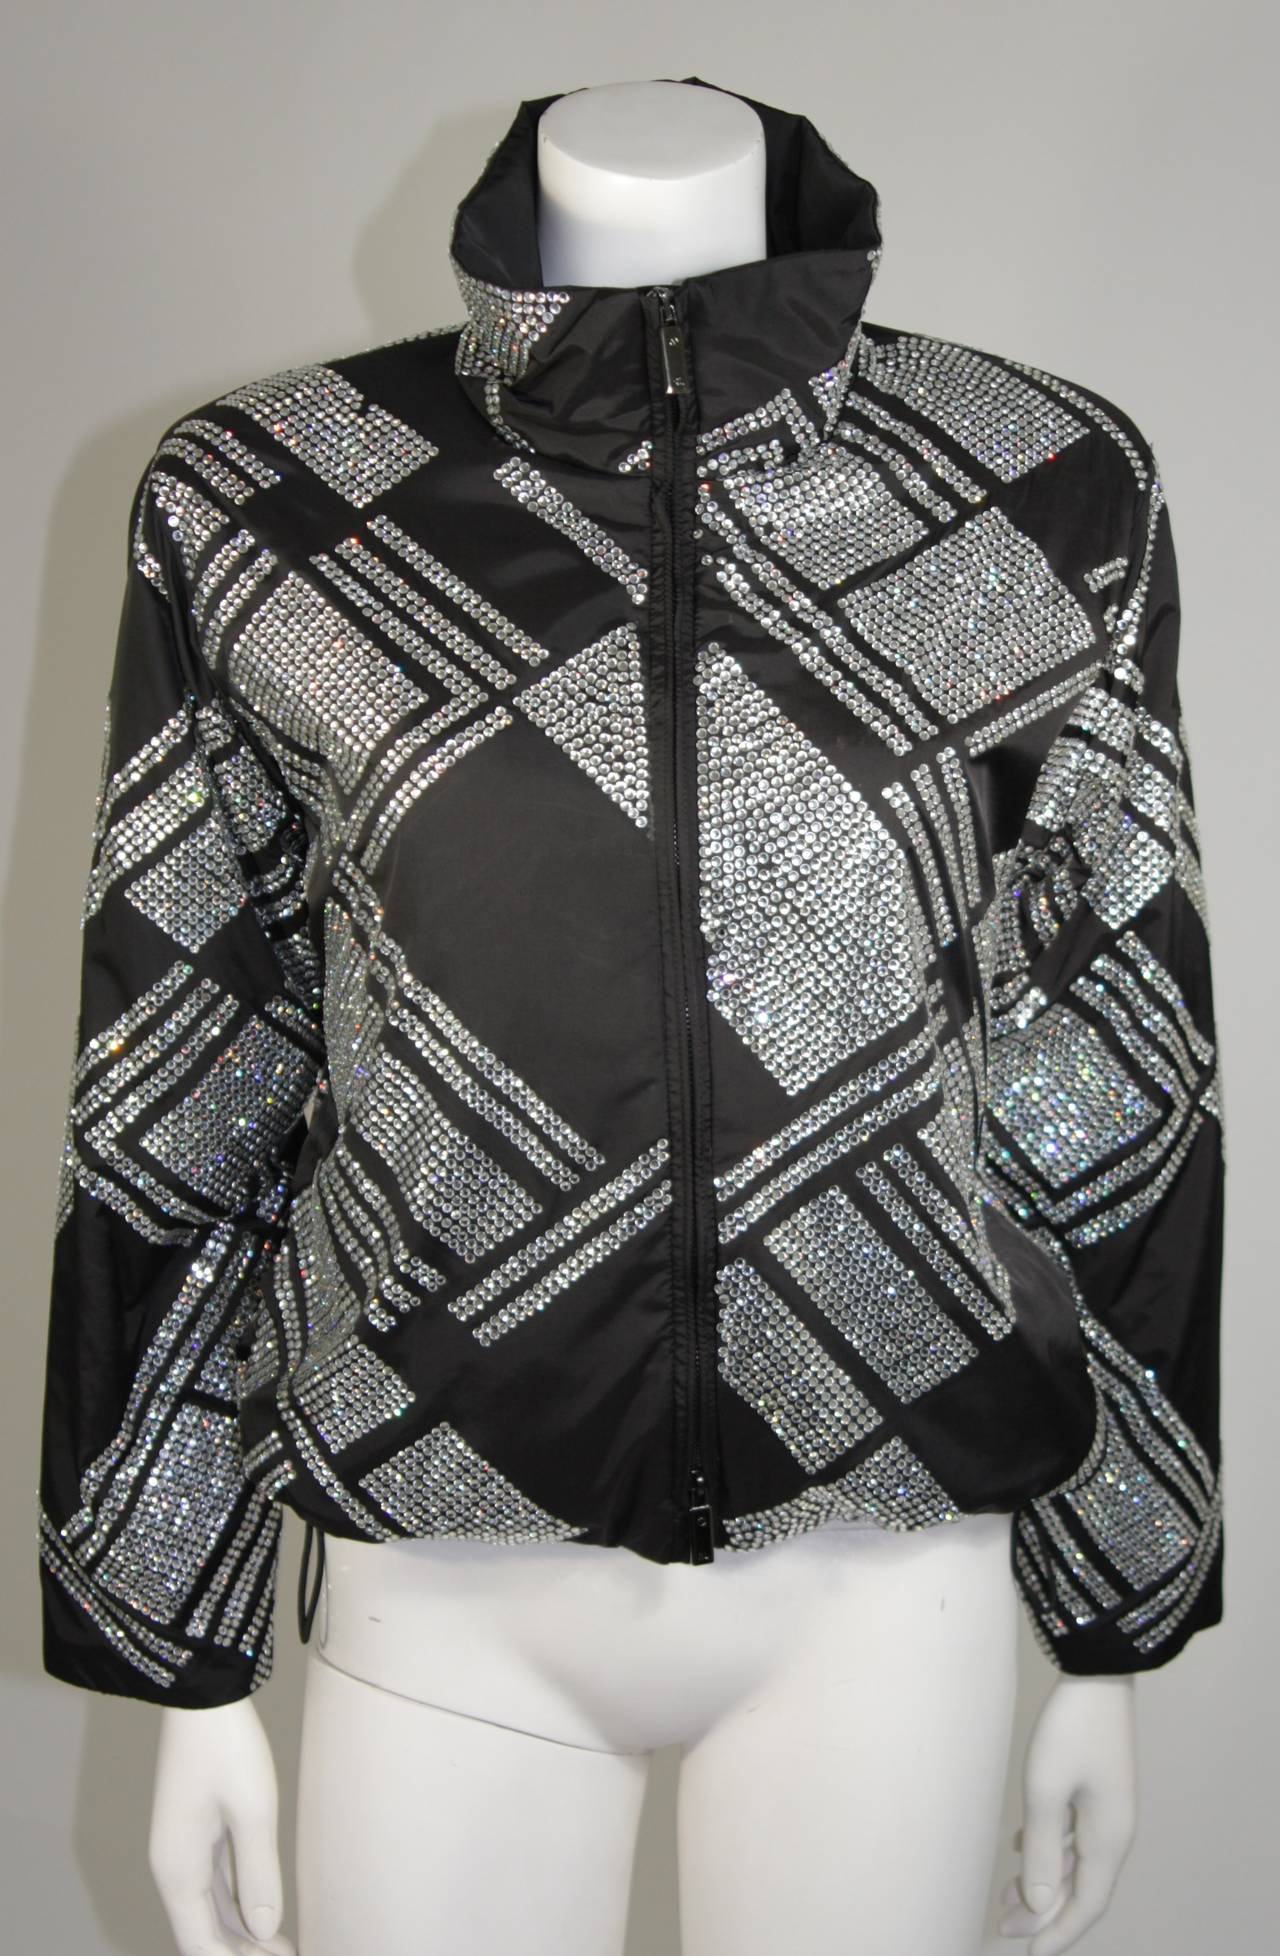 This Ralph Lauren design is available for viewing at our Beverly Hills Boutique. We offer a large selection of evening gowns and luxury garments.

This jacket is composed of a nylon and is embellished with rhinestones in a geometric form. There is